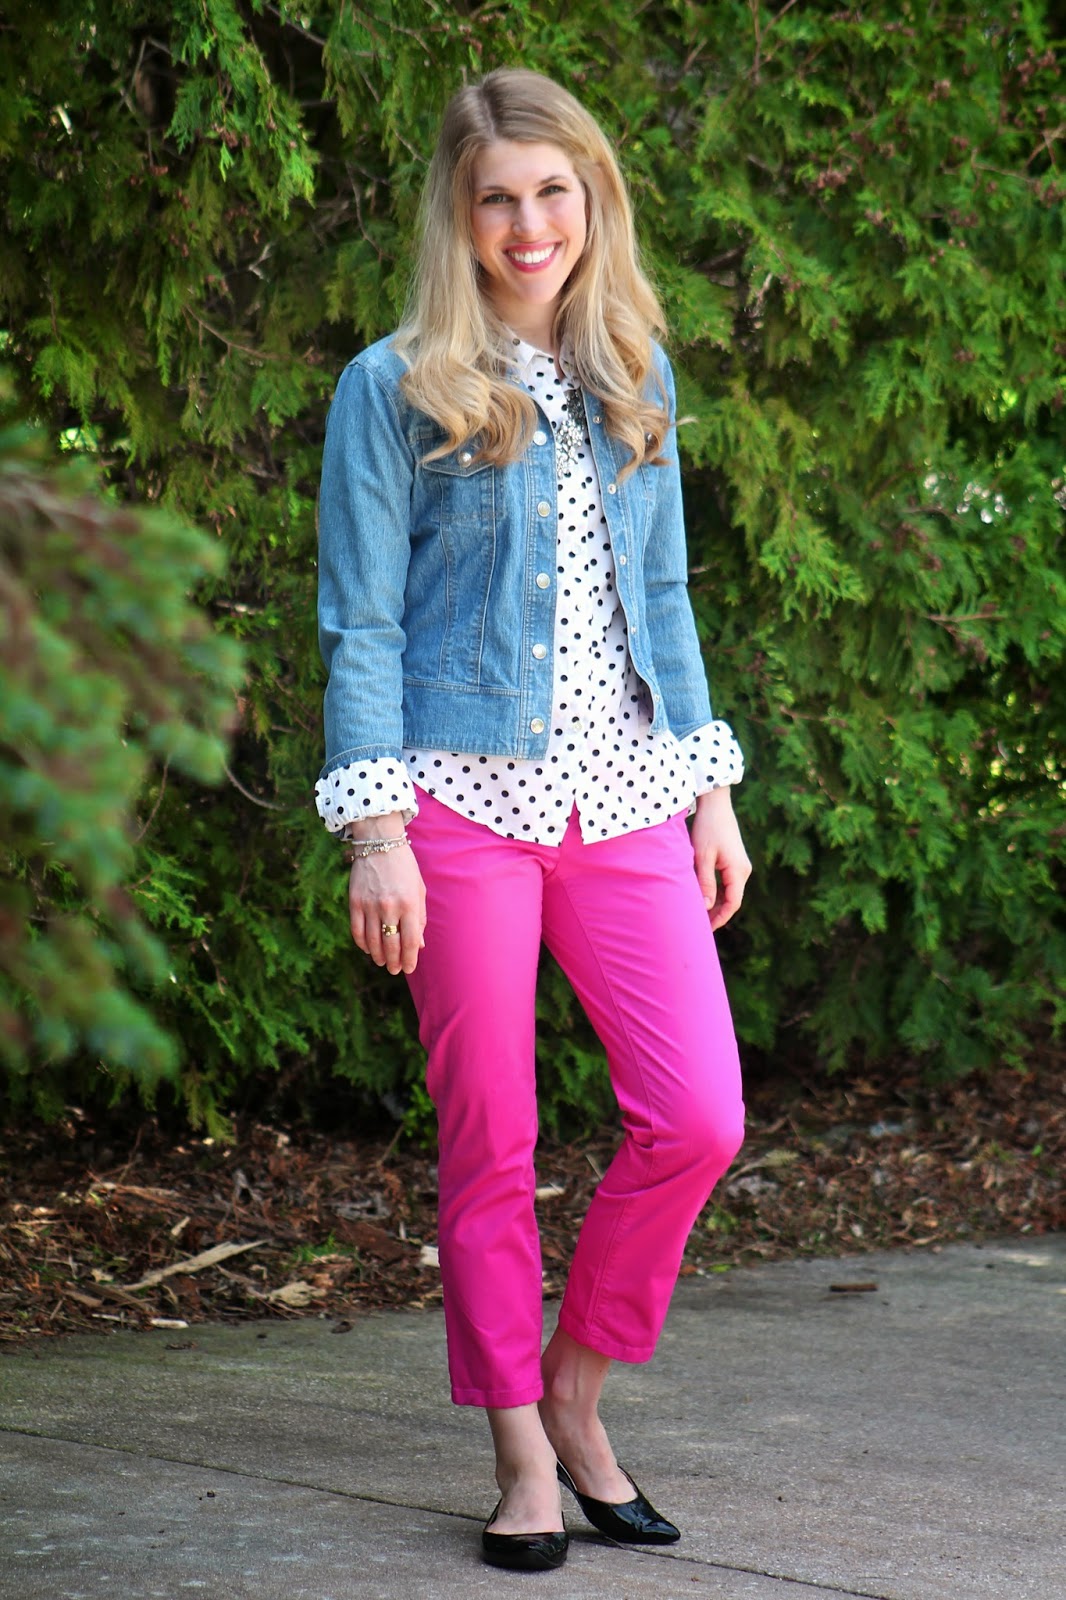 I do deClaire: Polka Dots and Pink Crops